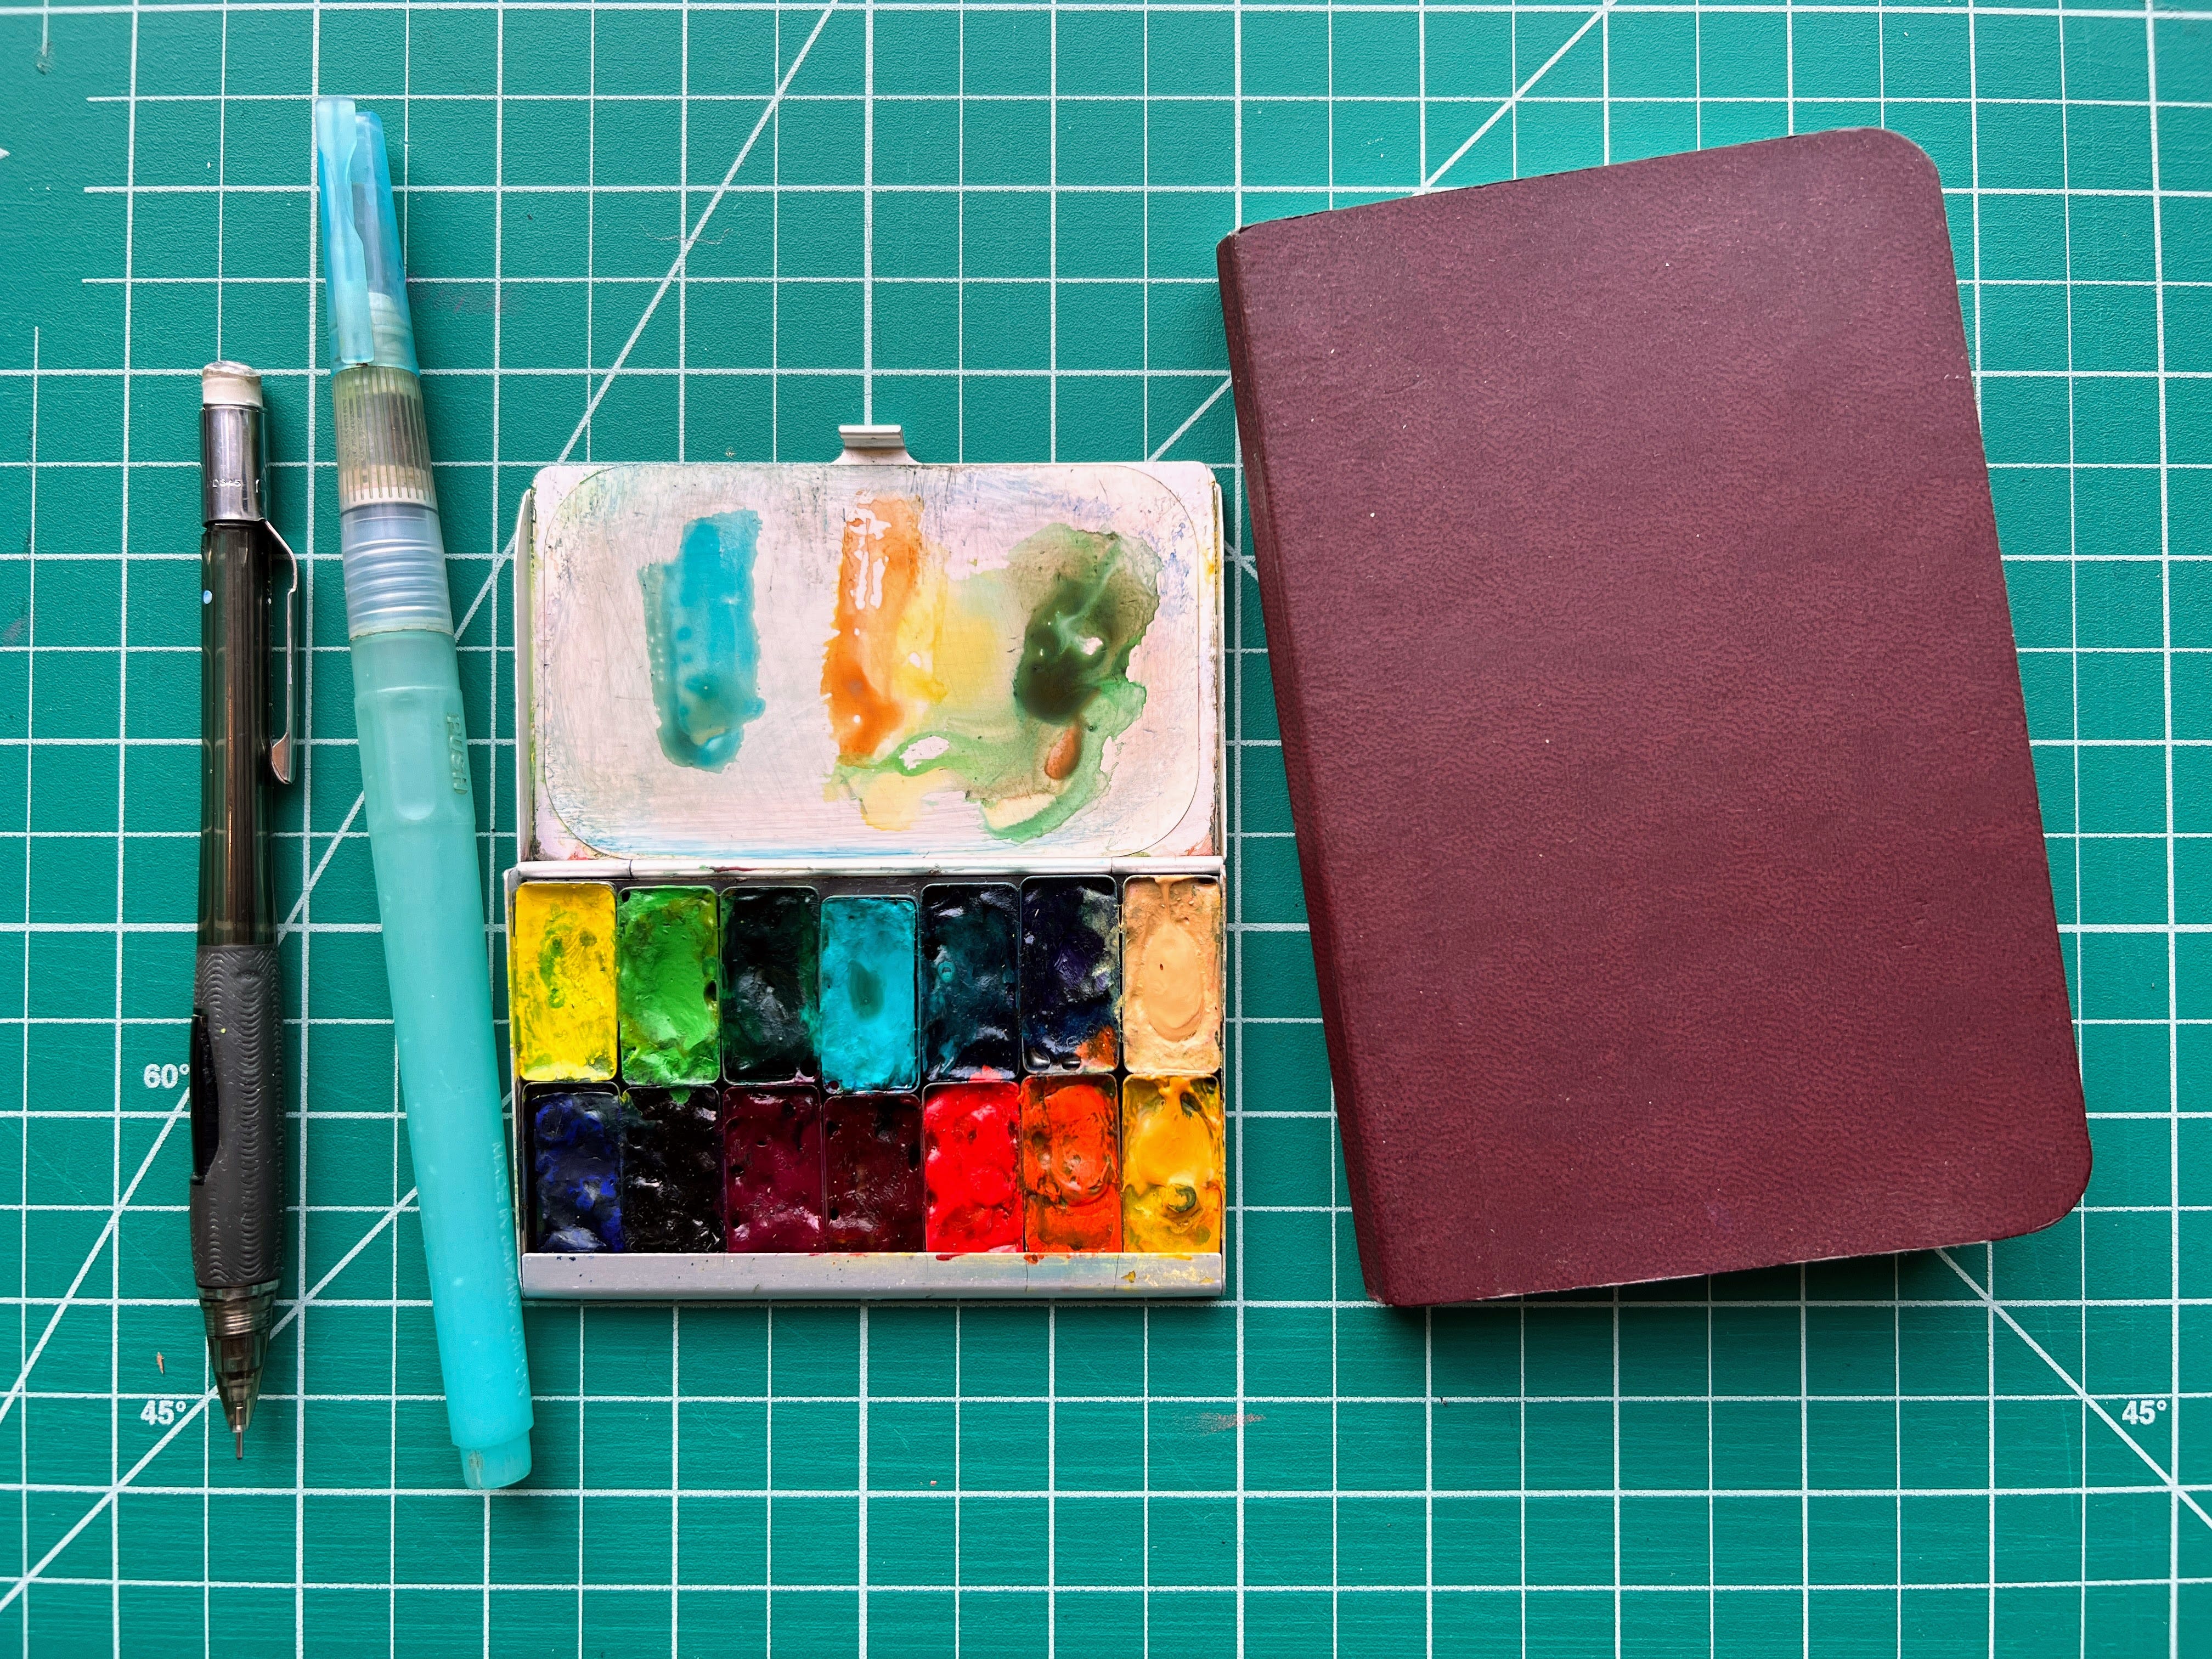 What's in my travel sketch kit just now?  Sketch Away: Travels with my  sketchbook